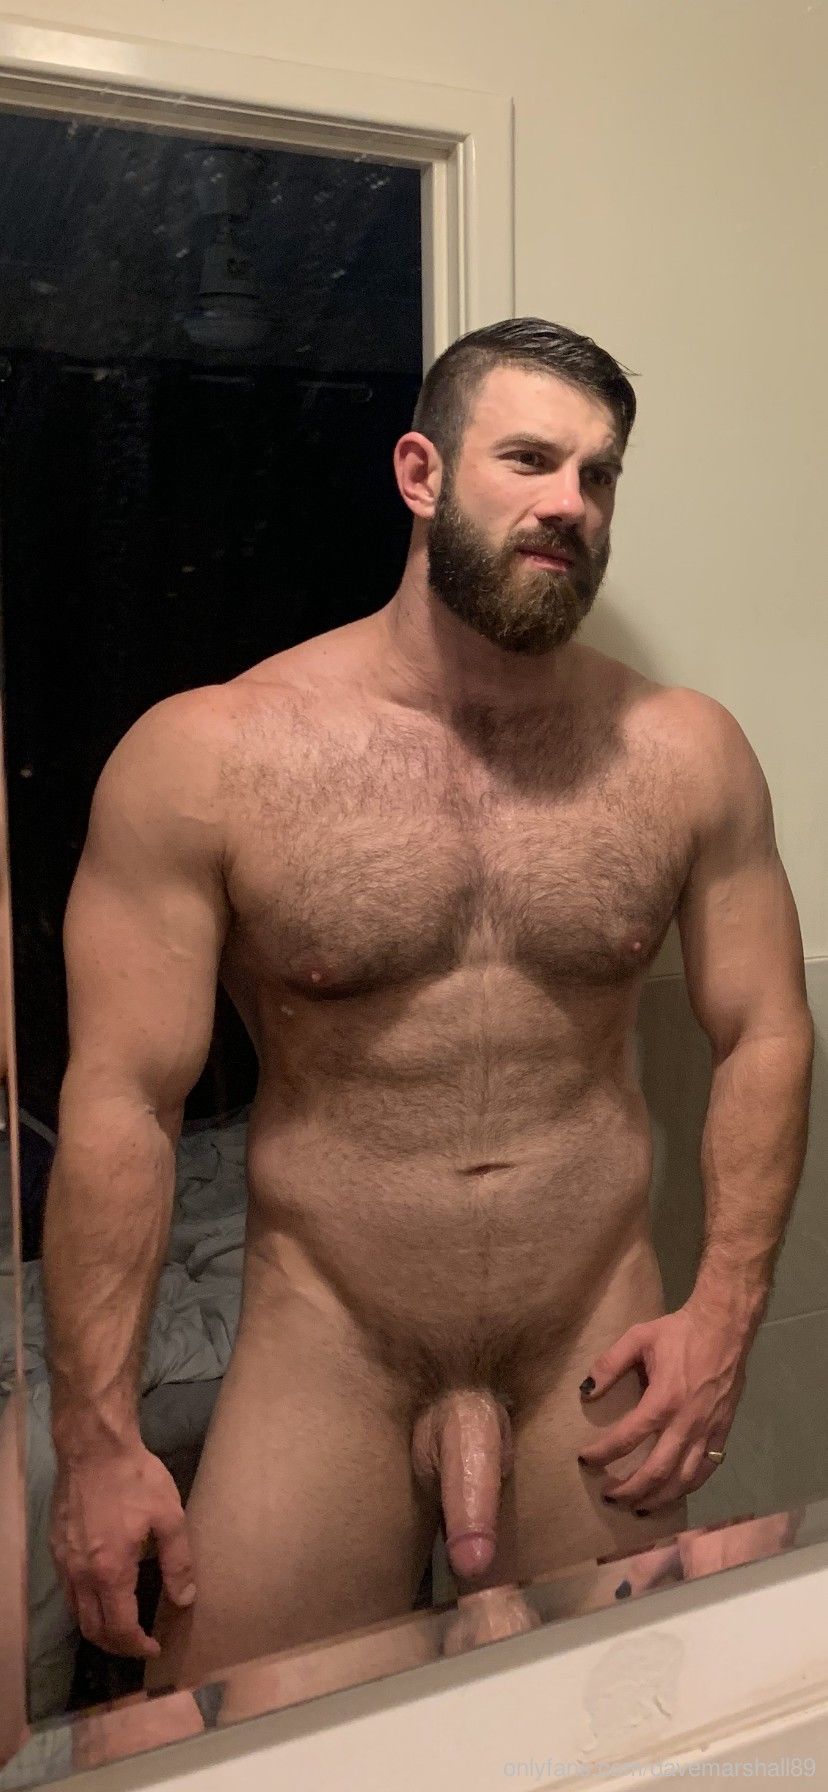 Dave marshall onlyfans gay porn